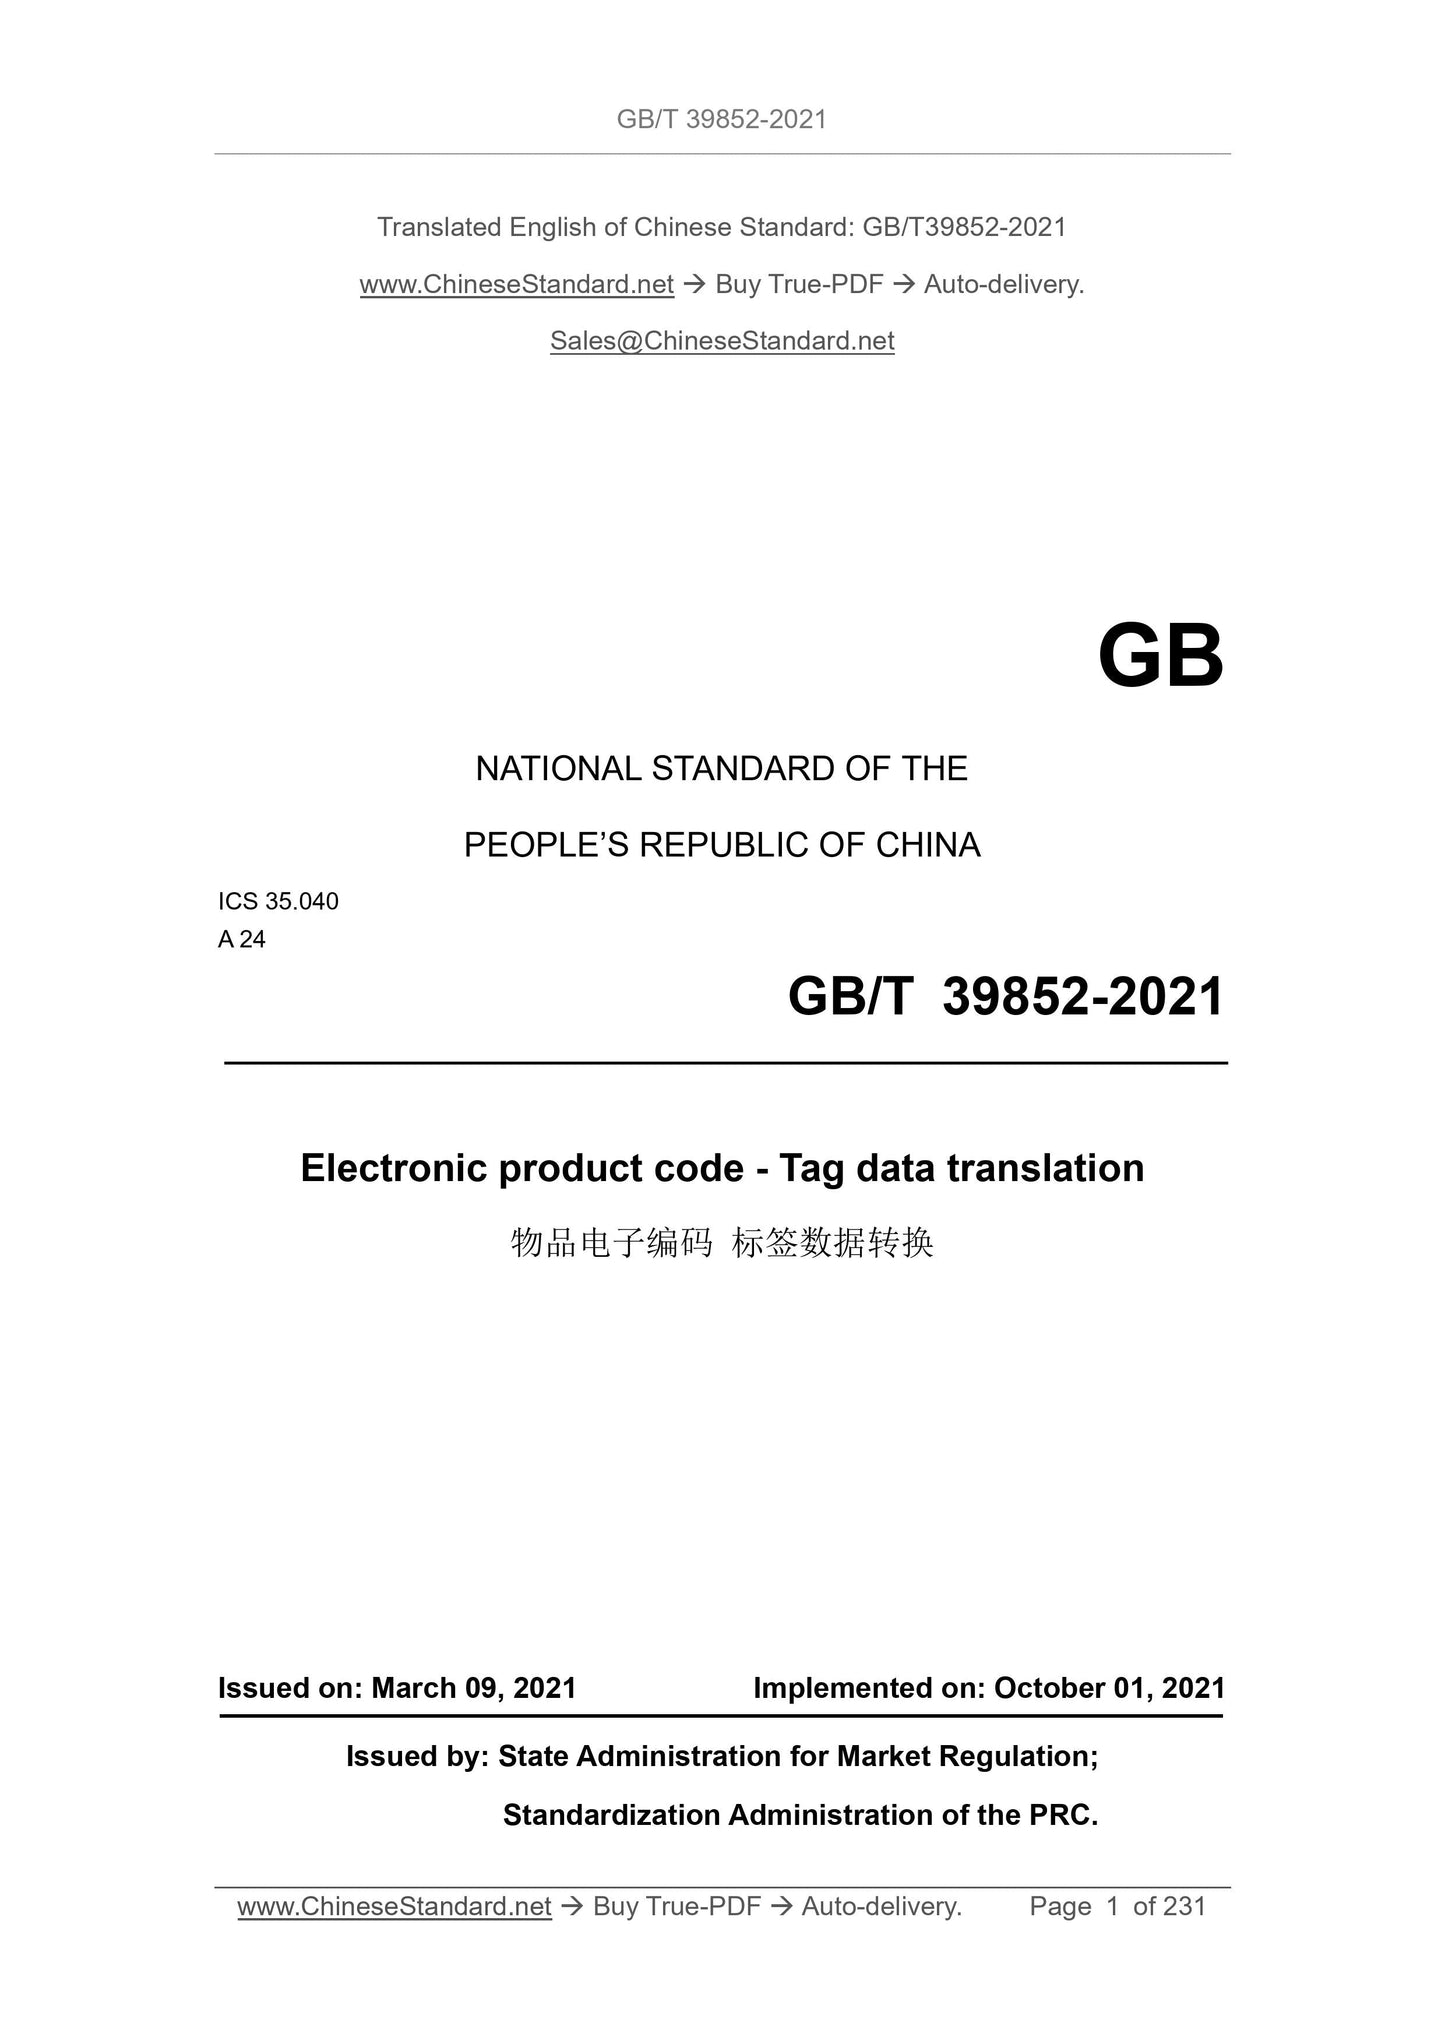 GB/T 39852-2021 Page 1